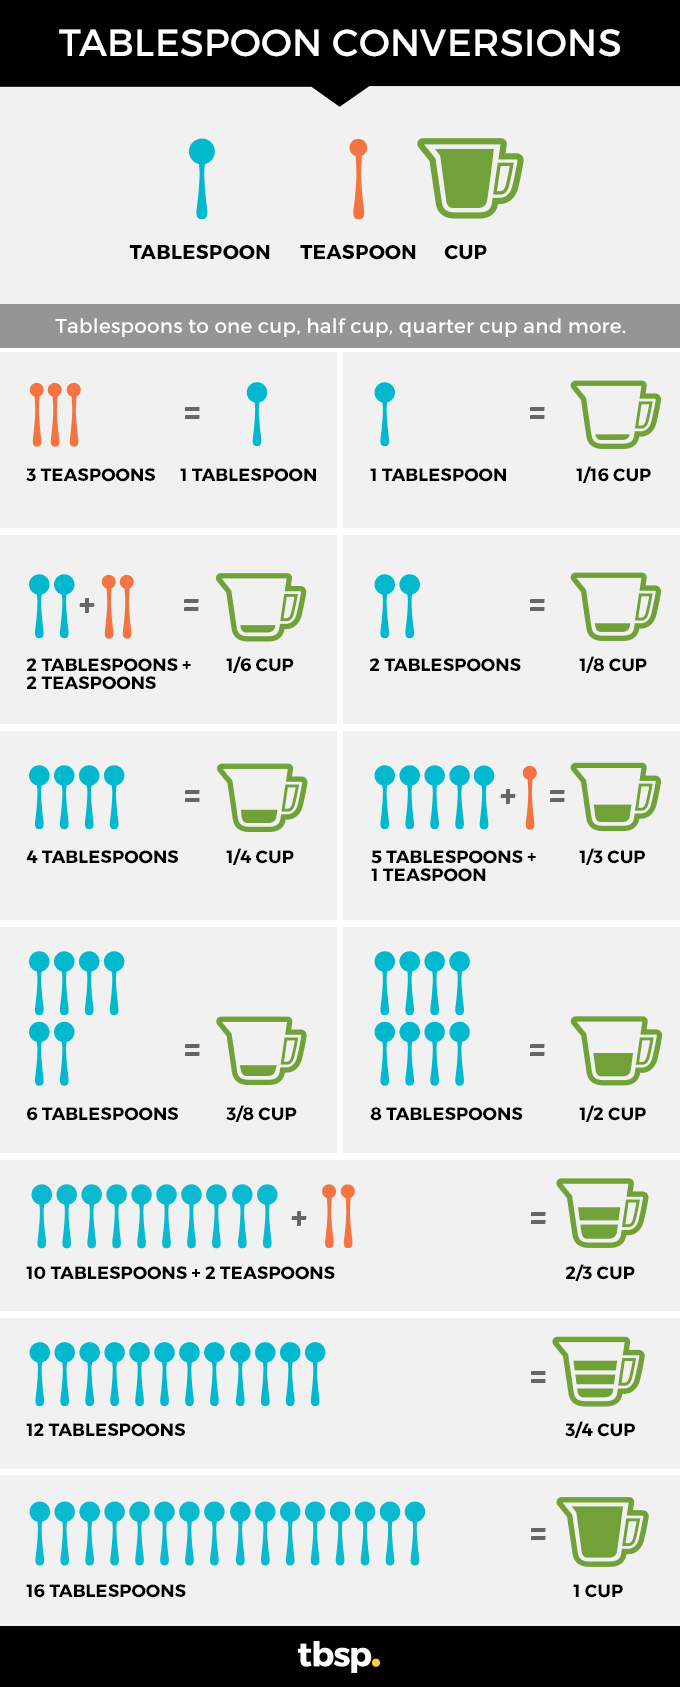 tablespoon conversions